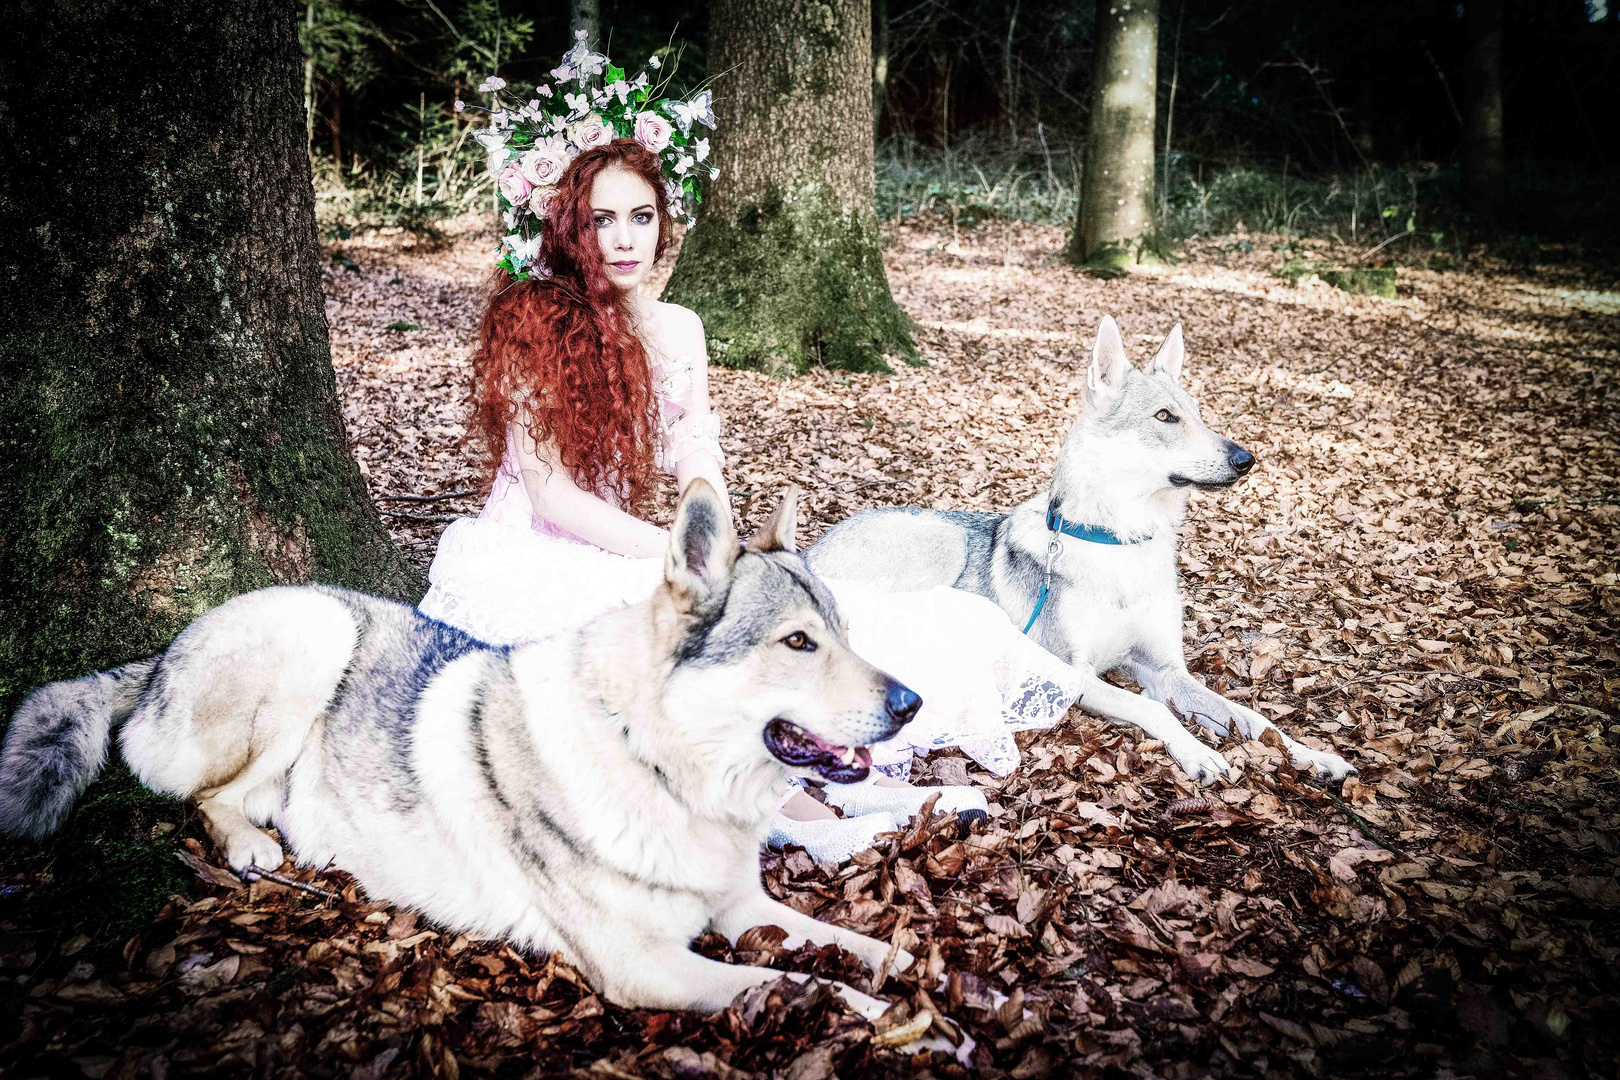 Cici with the wolves